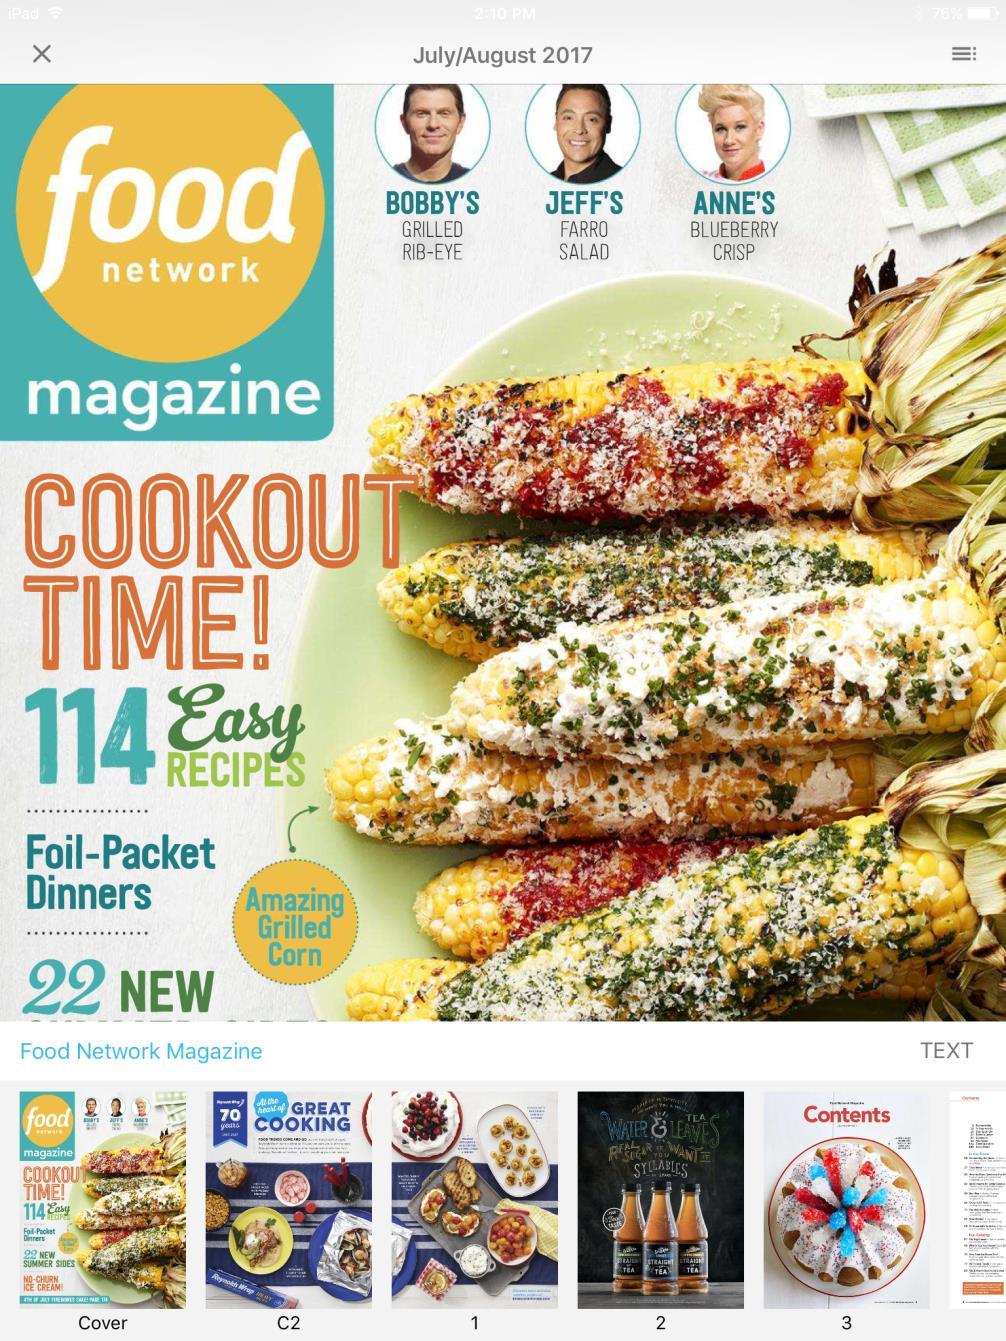 Reading Magazines in the Mobile App, continued Tapping the middle of the screen displays the top and bottom menus.